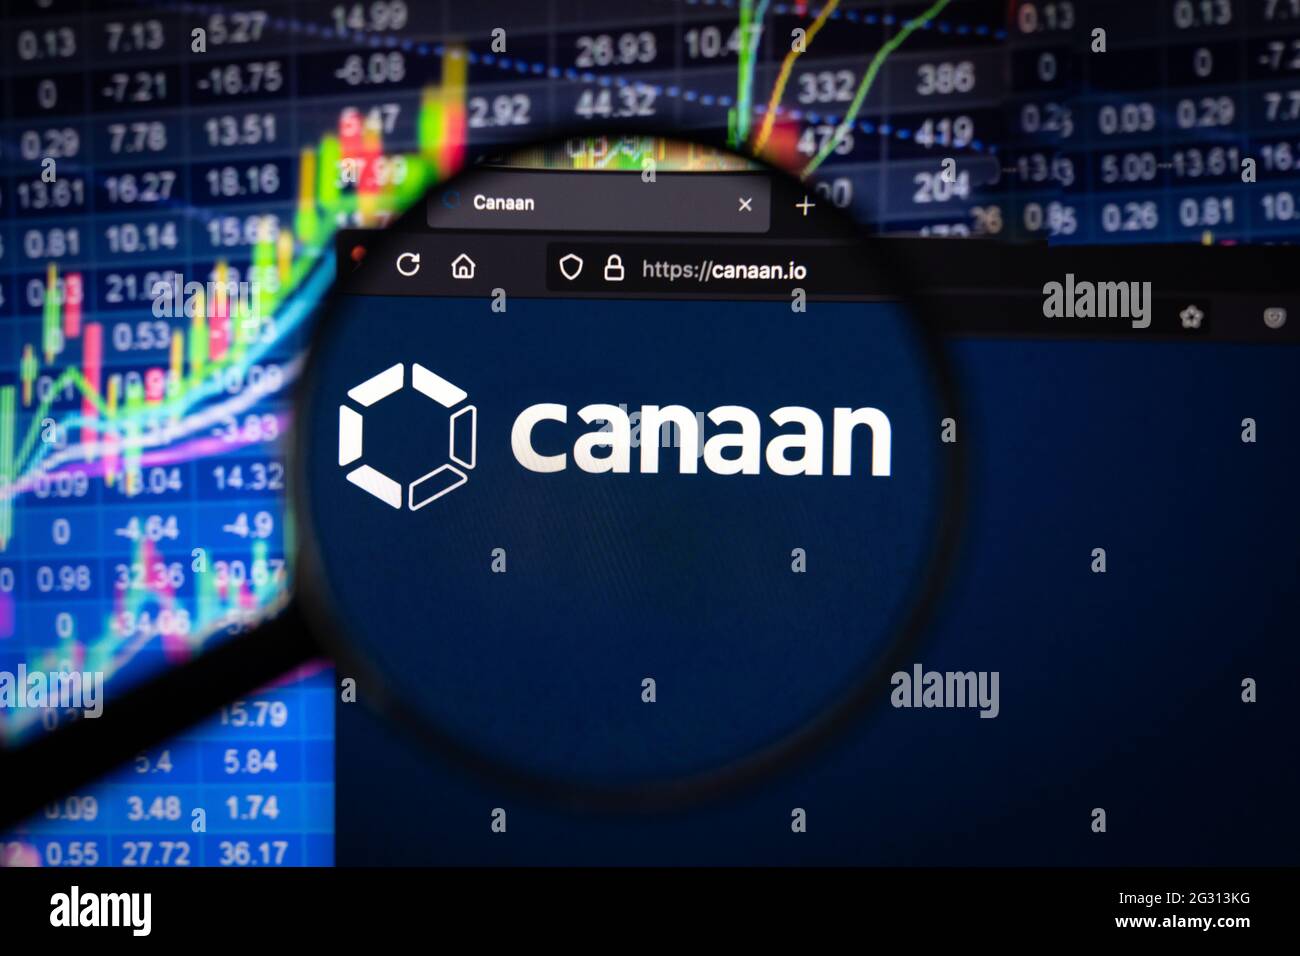 Canaan company logo on a website with blurry stock market developments in the background, seen on a computer screen through a magnifying glass Stock Photo